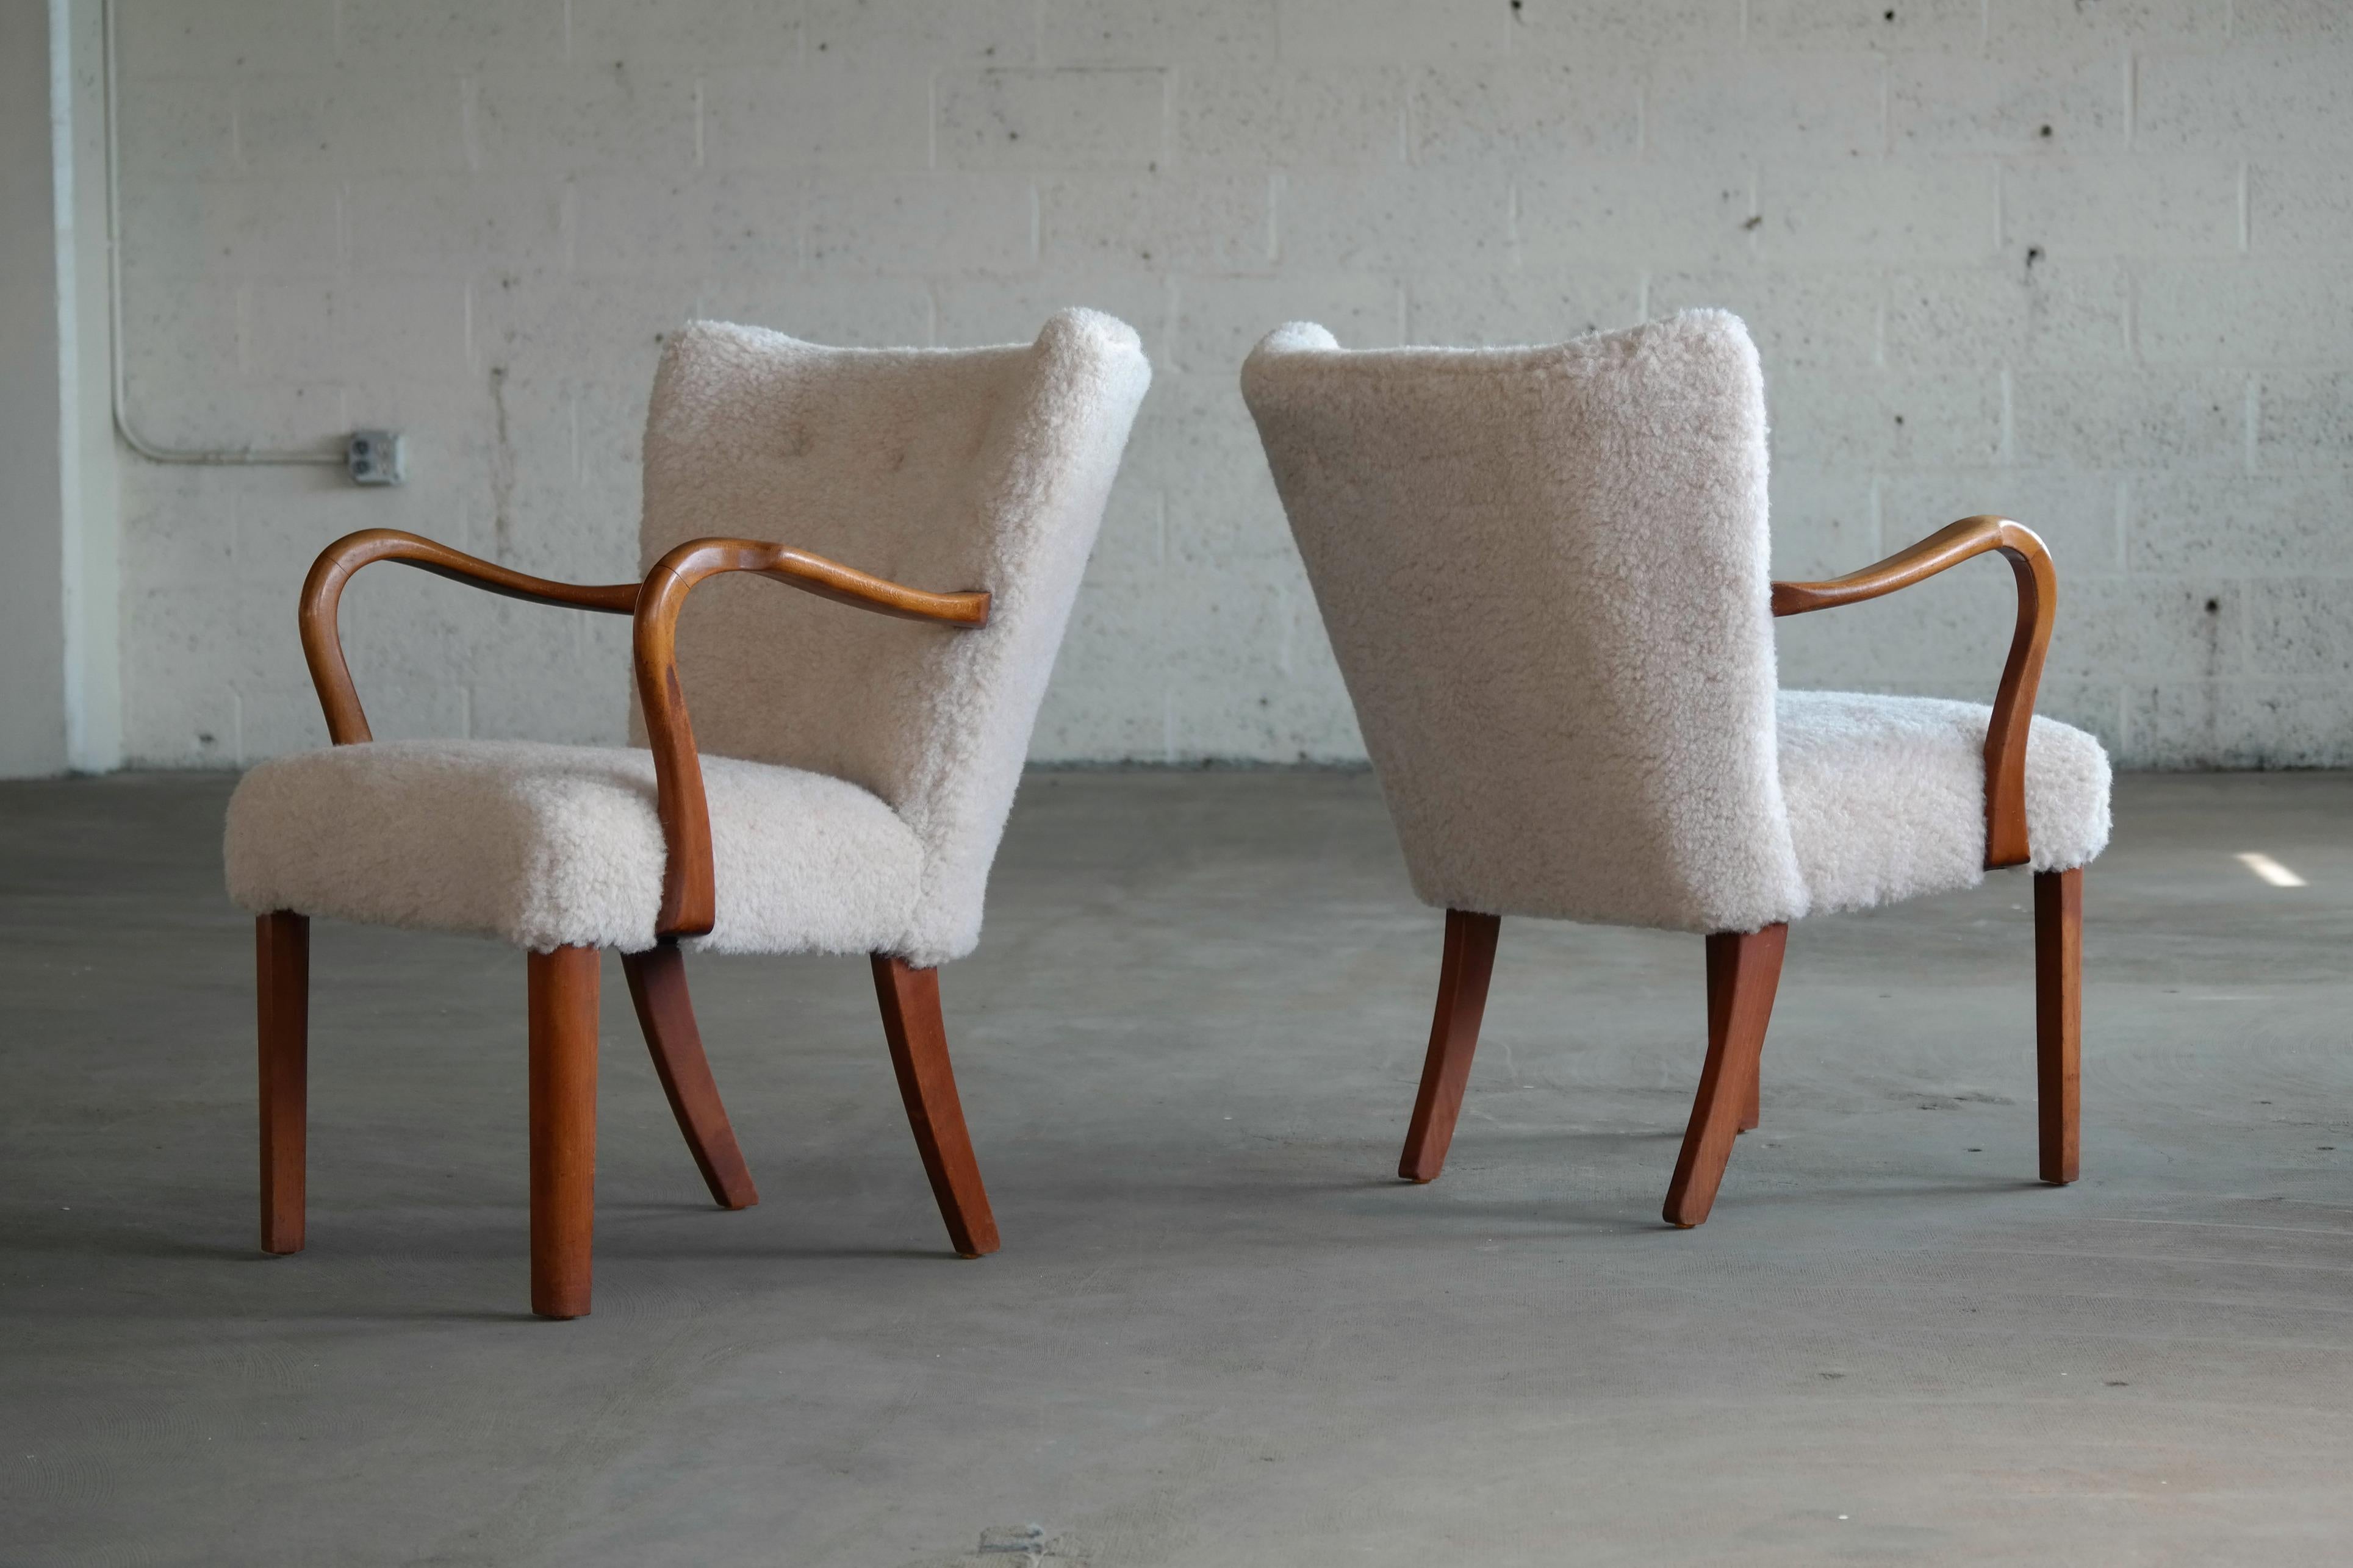 Pair of elegant nice smaller size easy chairs from the late 1940s-1950s very typical of Fritz Hansen's design style both in terms of legs and armrests. Made from stained beechwood with nicely sculpted/carved armrests. Some natural age wear to the